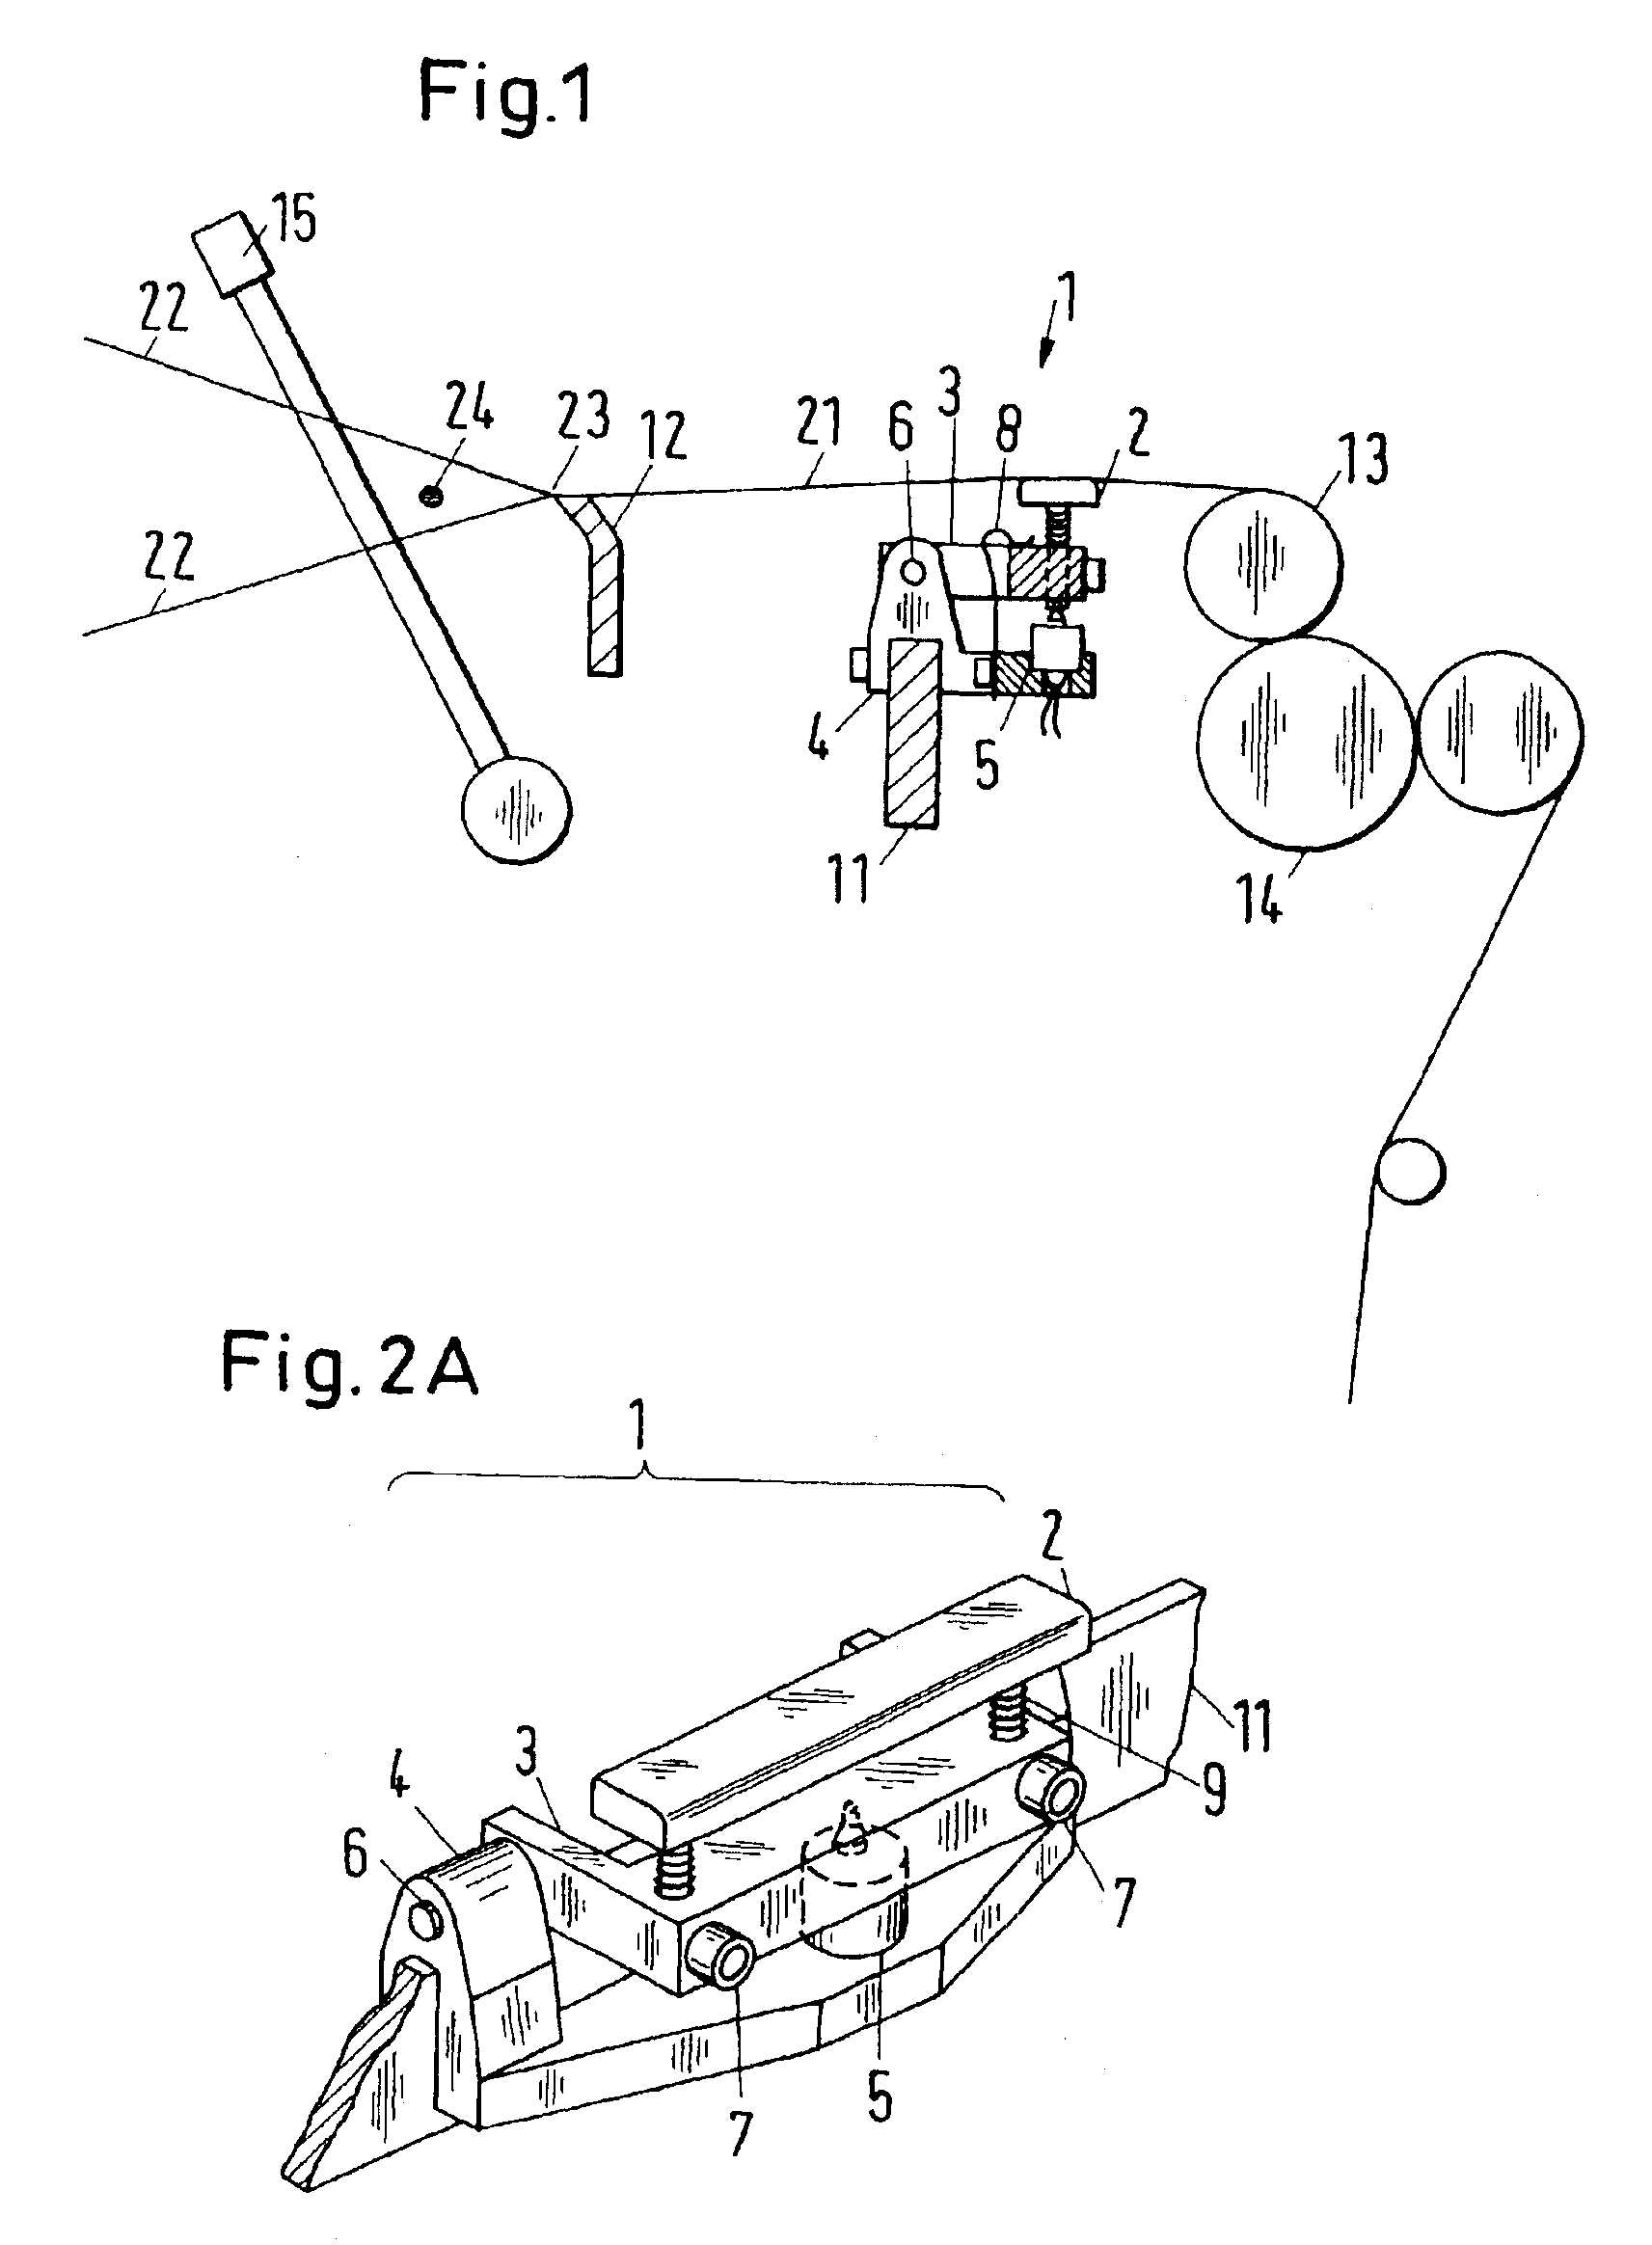 Measuring apparatus for measuring the cloth tension in a weaving machine and a weaving machine with a measuring apparatus of this kind